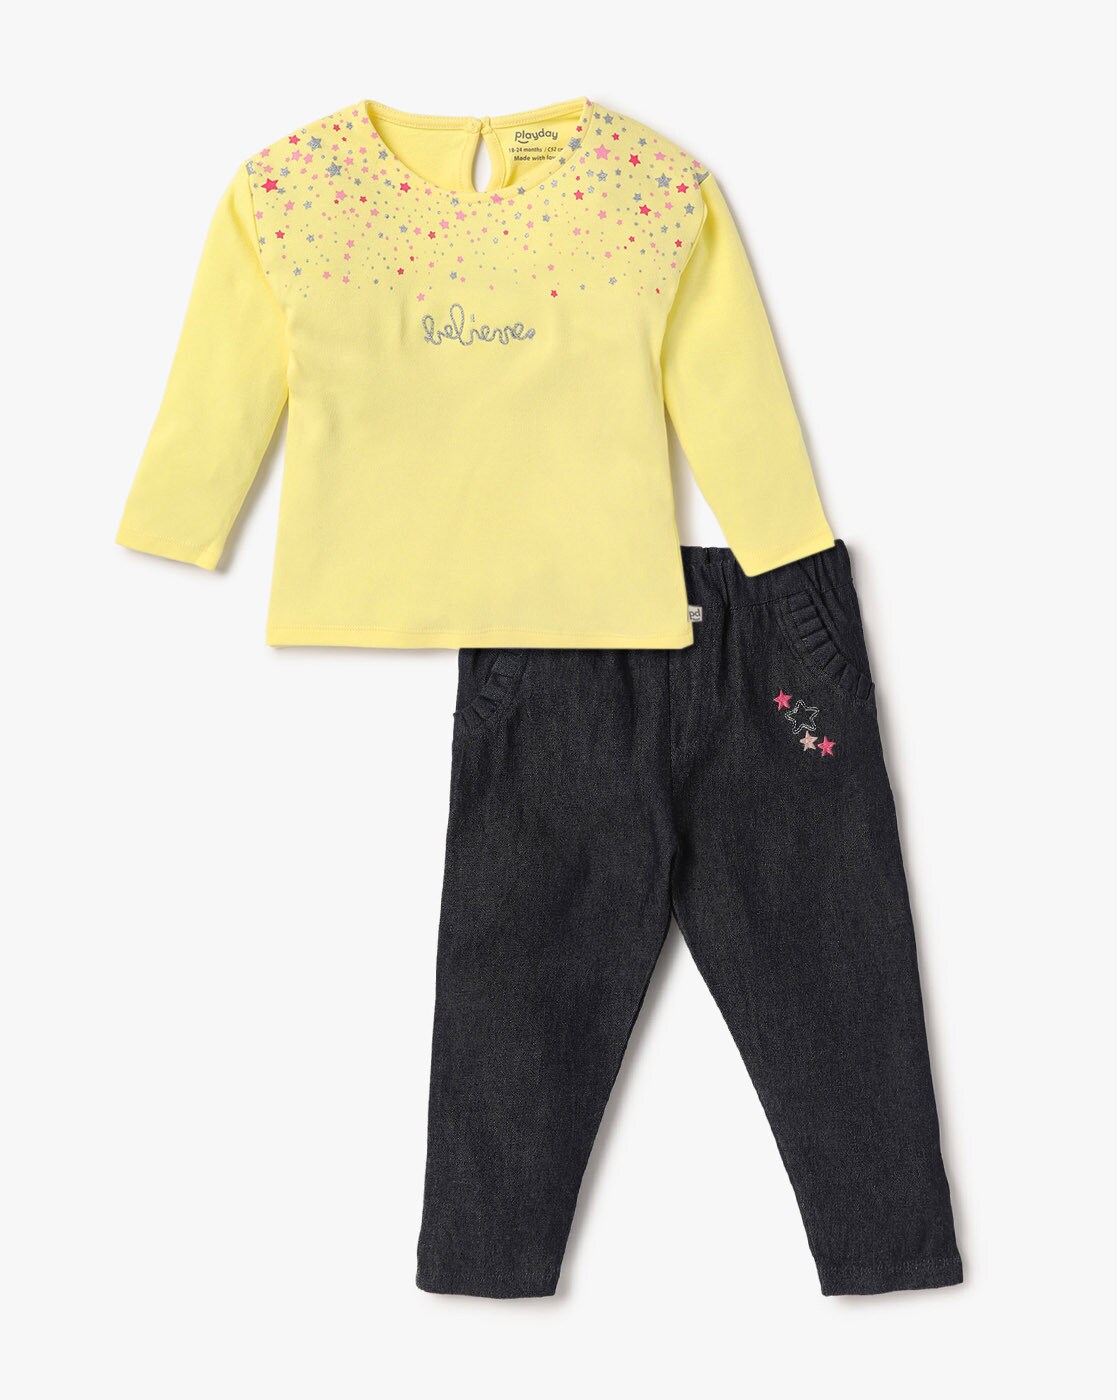 Plus Dsgn Studio Embroidered T-Shirt And Track Pants Short | boohoo